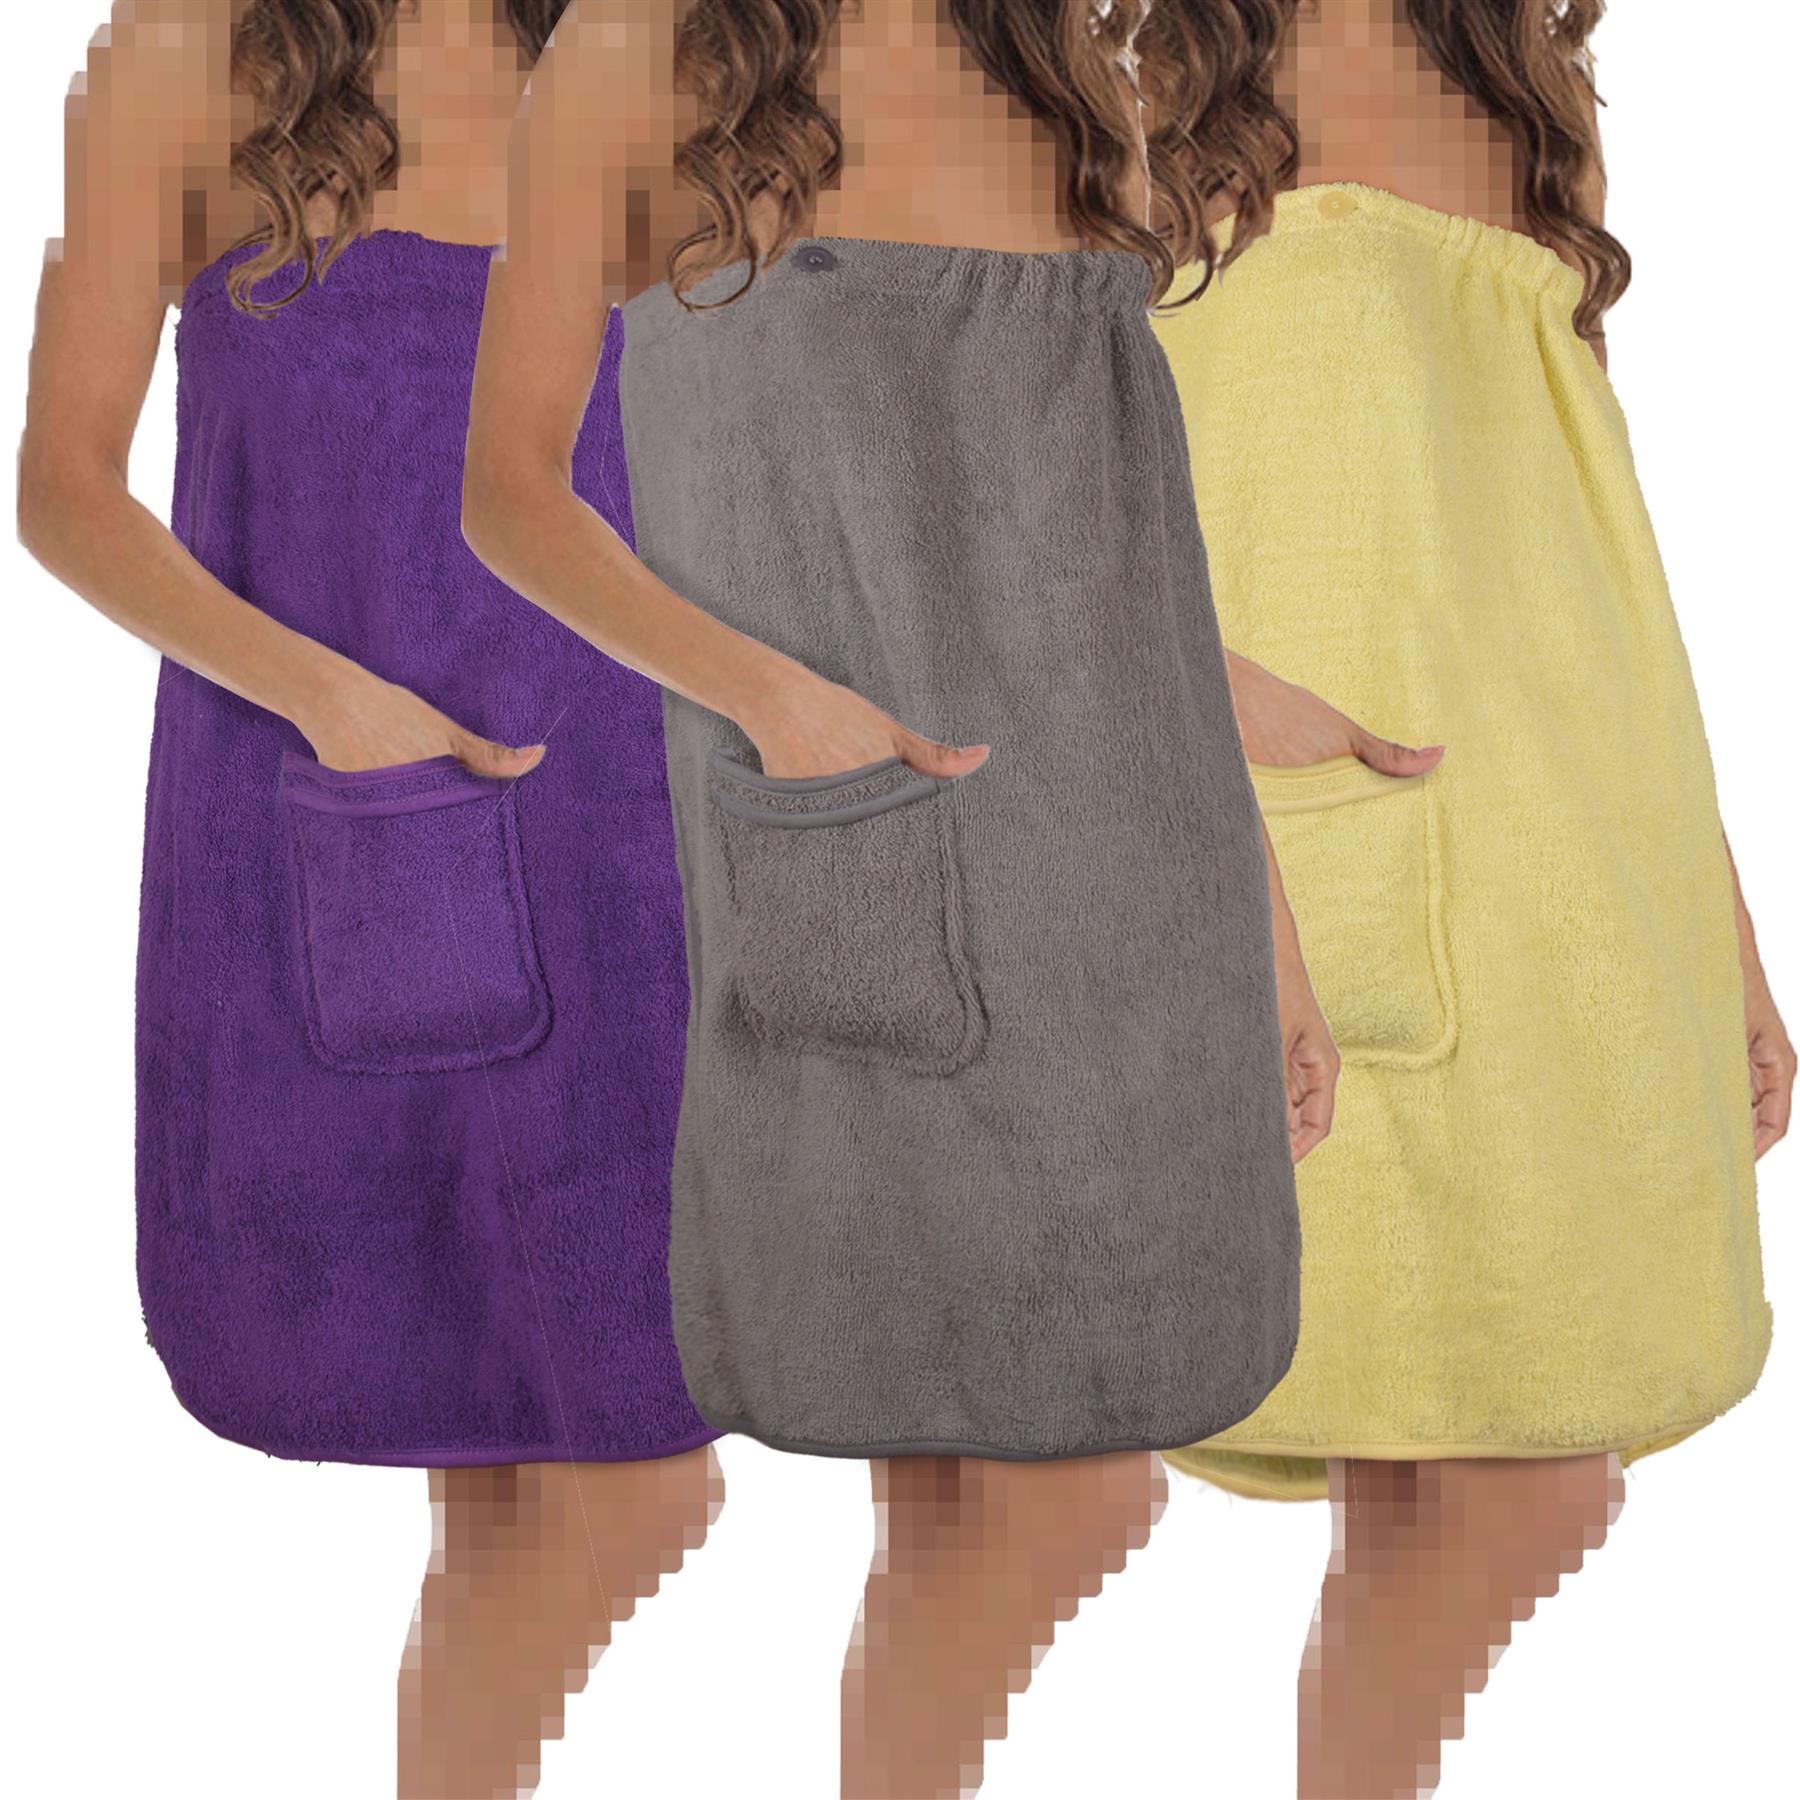 Ladies Towel Wrap Highly Absorbent Soft Cotton Women Bath Body Wrap With Pocket